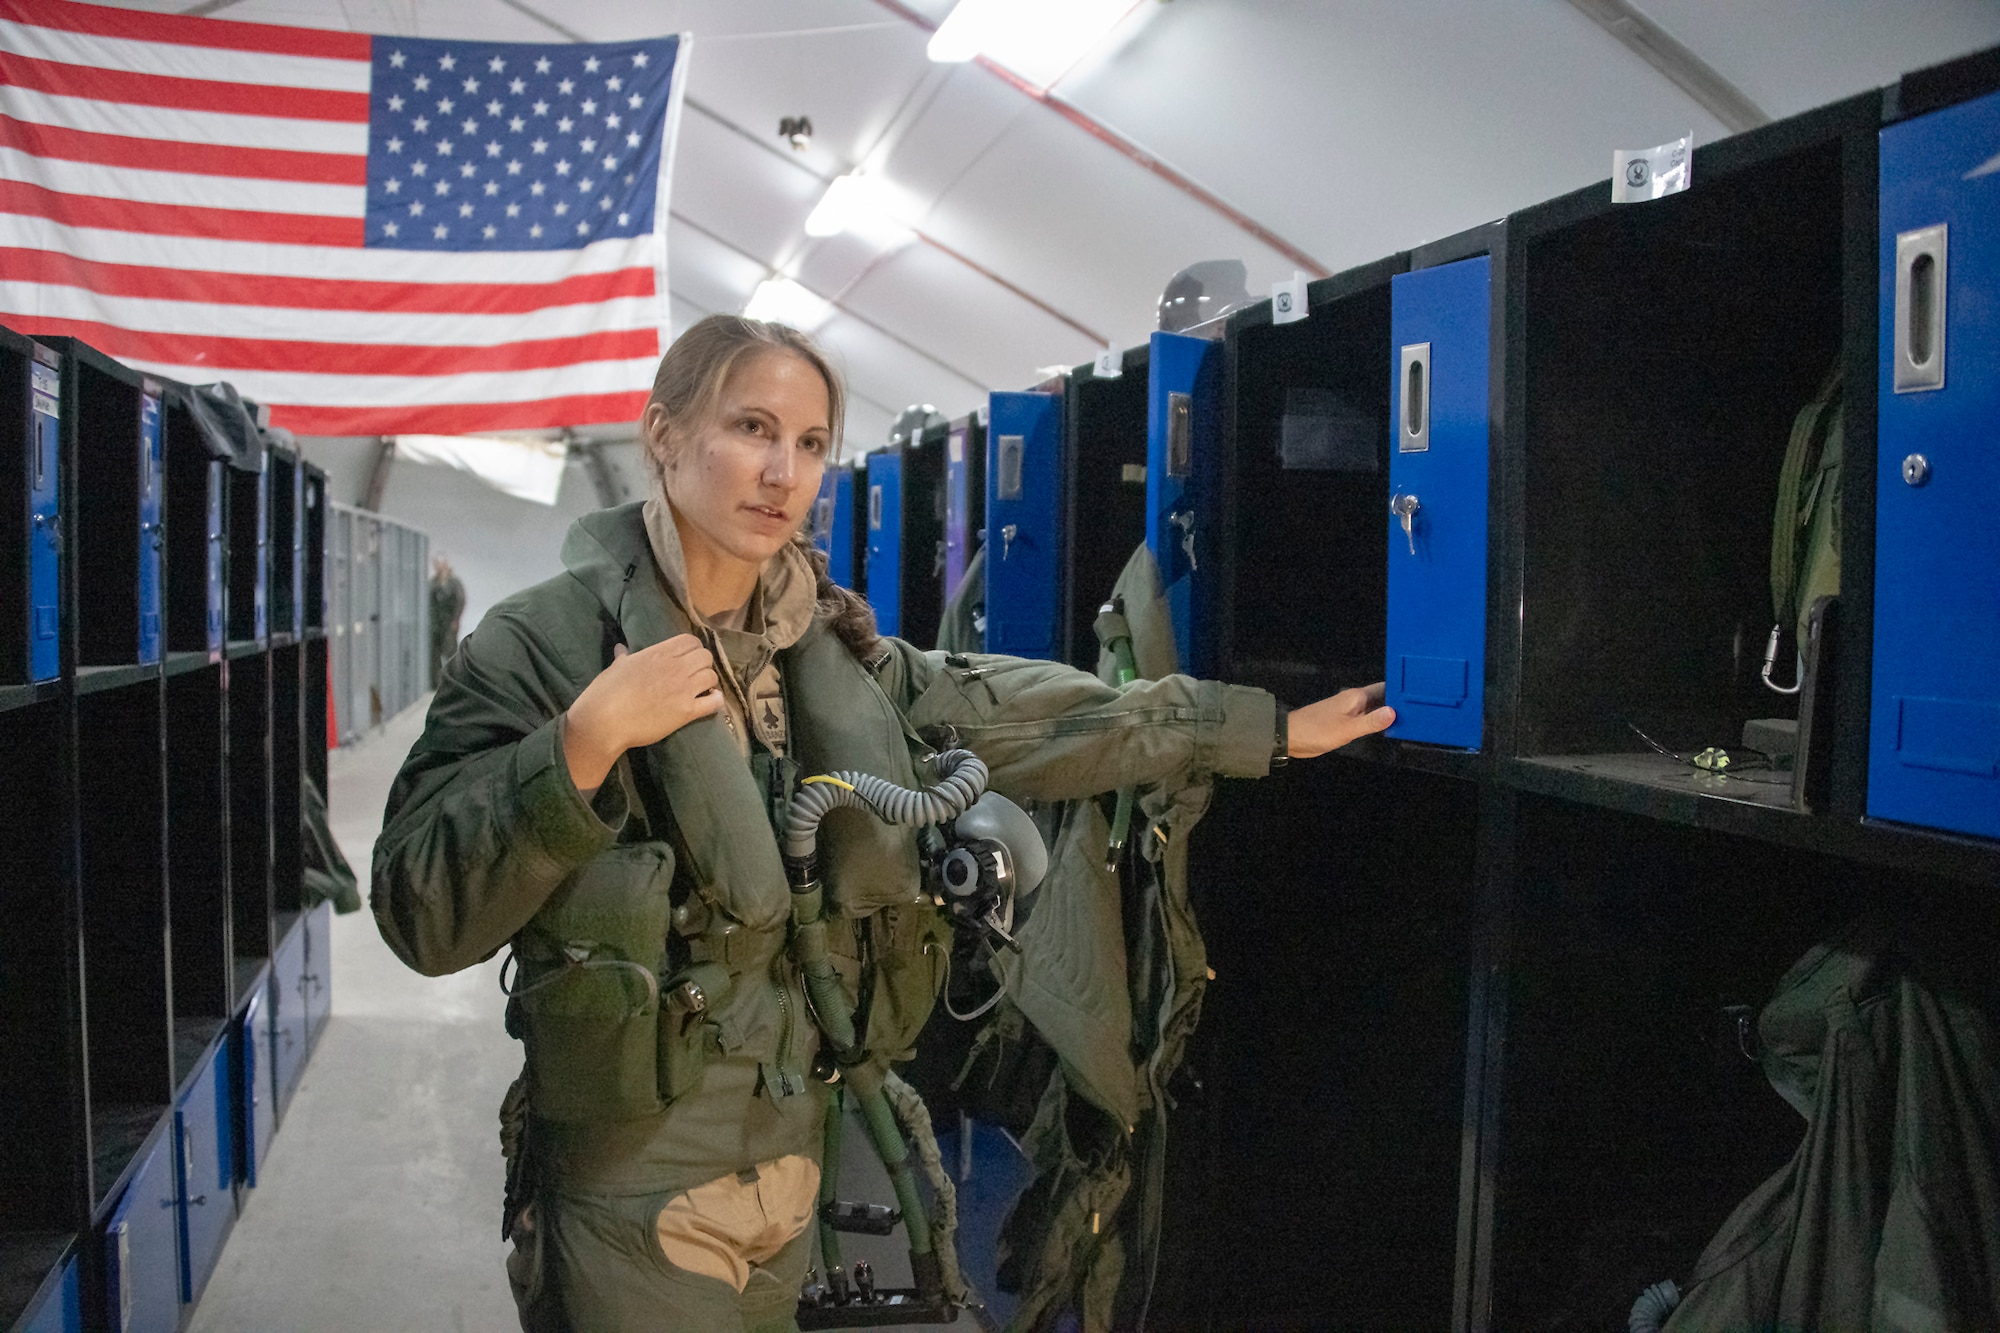 U.S. Air Force Capt. Emily Thompson, 421st Expeditionary Fighter Squadron pilot, dons flight equipment at the Aircrew Flight Equipment shop on Al Dhafra Air Base, United Arab Emirates, June 5, 2020. Thompson is the first female to fly an F-35A Lightning II into combat. She is currently deployed from Hill Air Force Base, Utah. (U.S. Air Force photo by Tech. Sgt. Kat Justen)